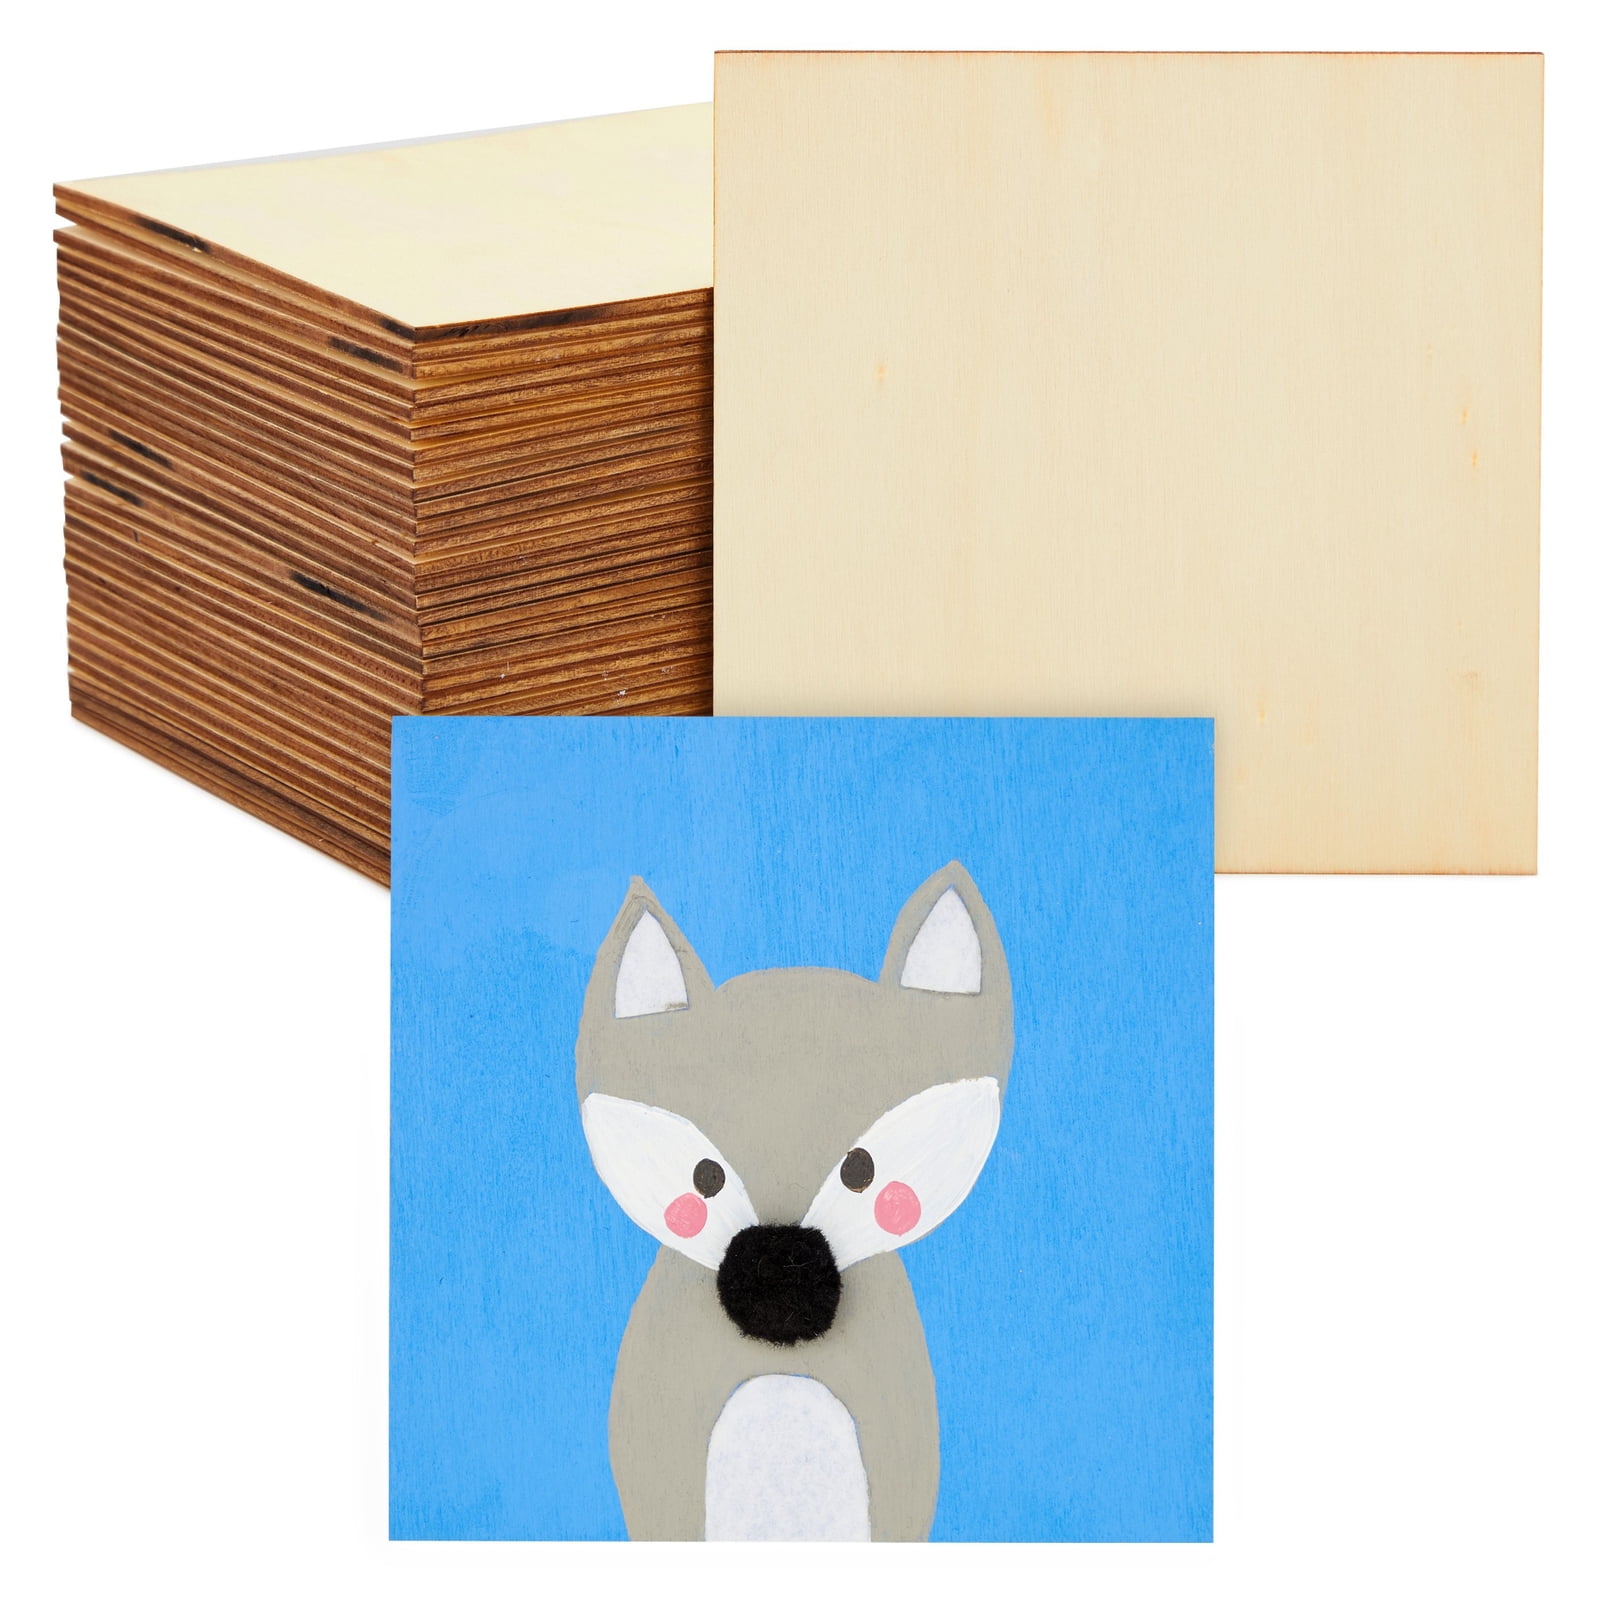 1 x 1 Inches Bright Creations 200-Pack Unfinished Wood Square Tile Cutouts for DIY Crafts 